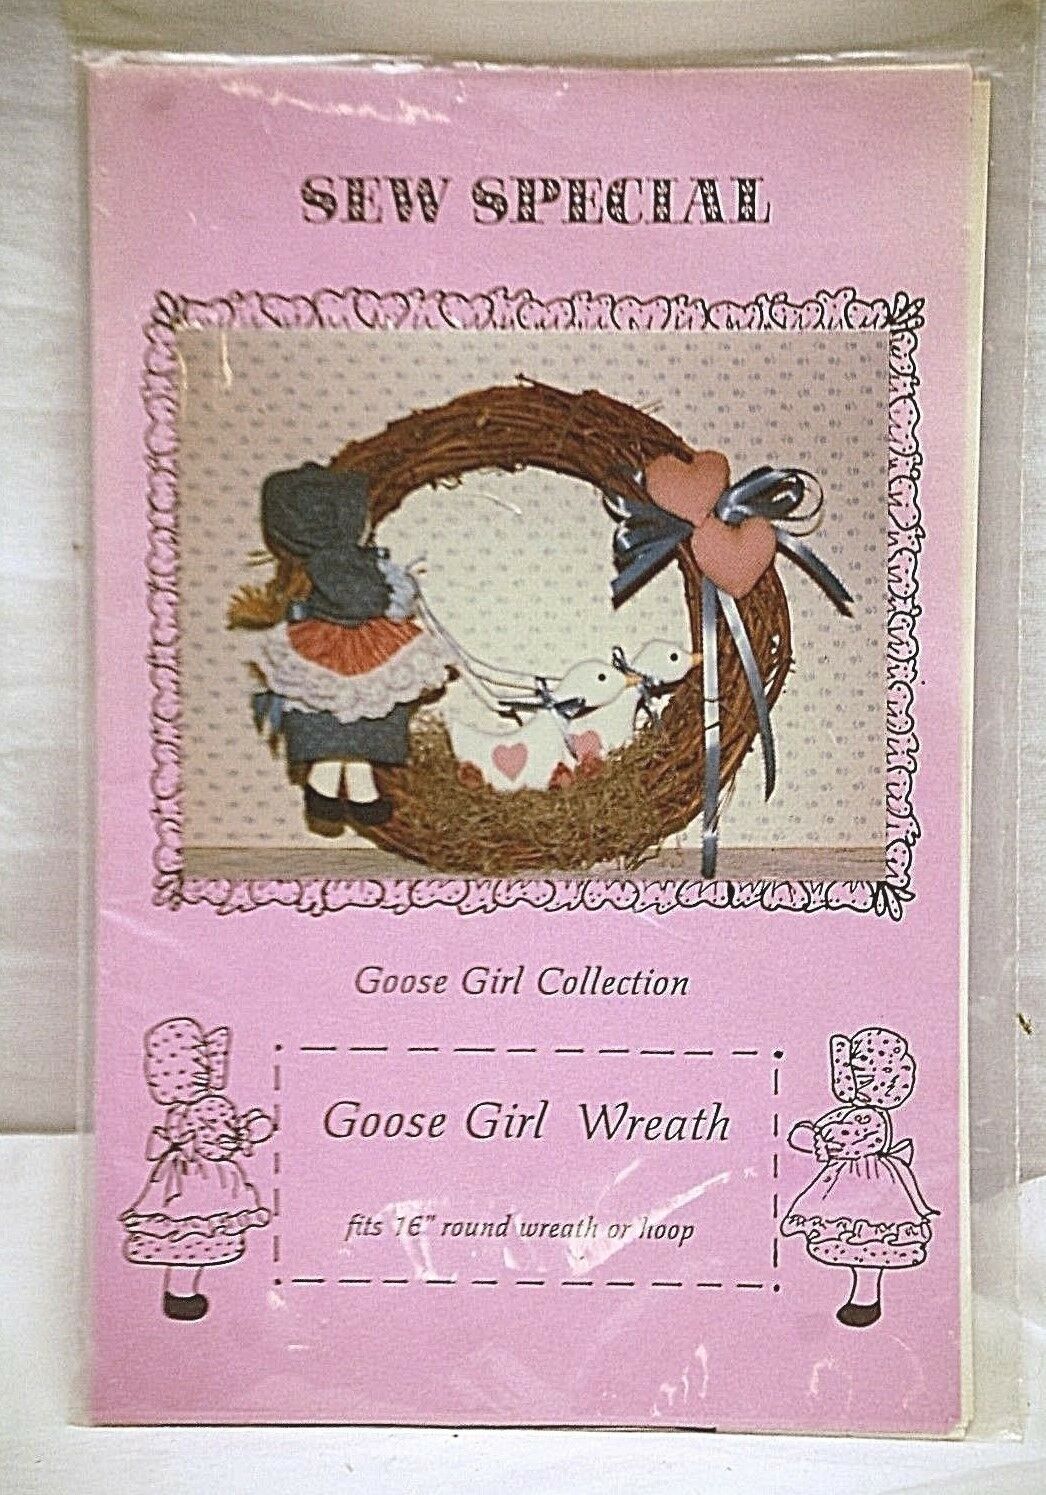 Vintage Sew Special by Judiann Goose Girl Wreath Fits 16" Round Wreath or Hoop - $6.92